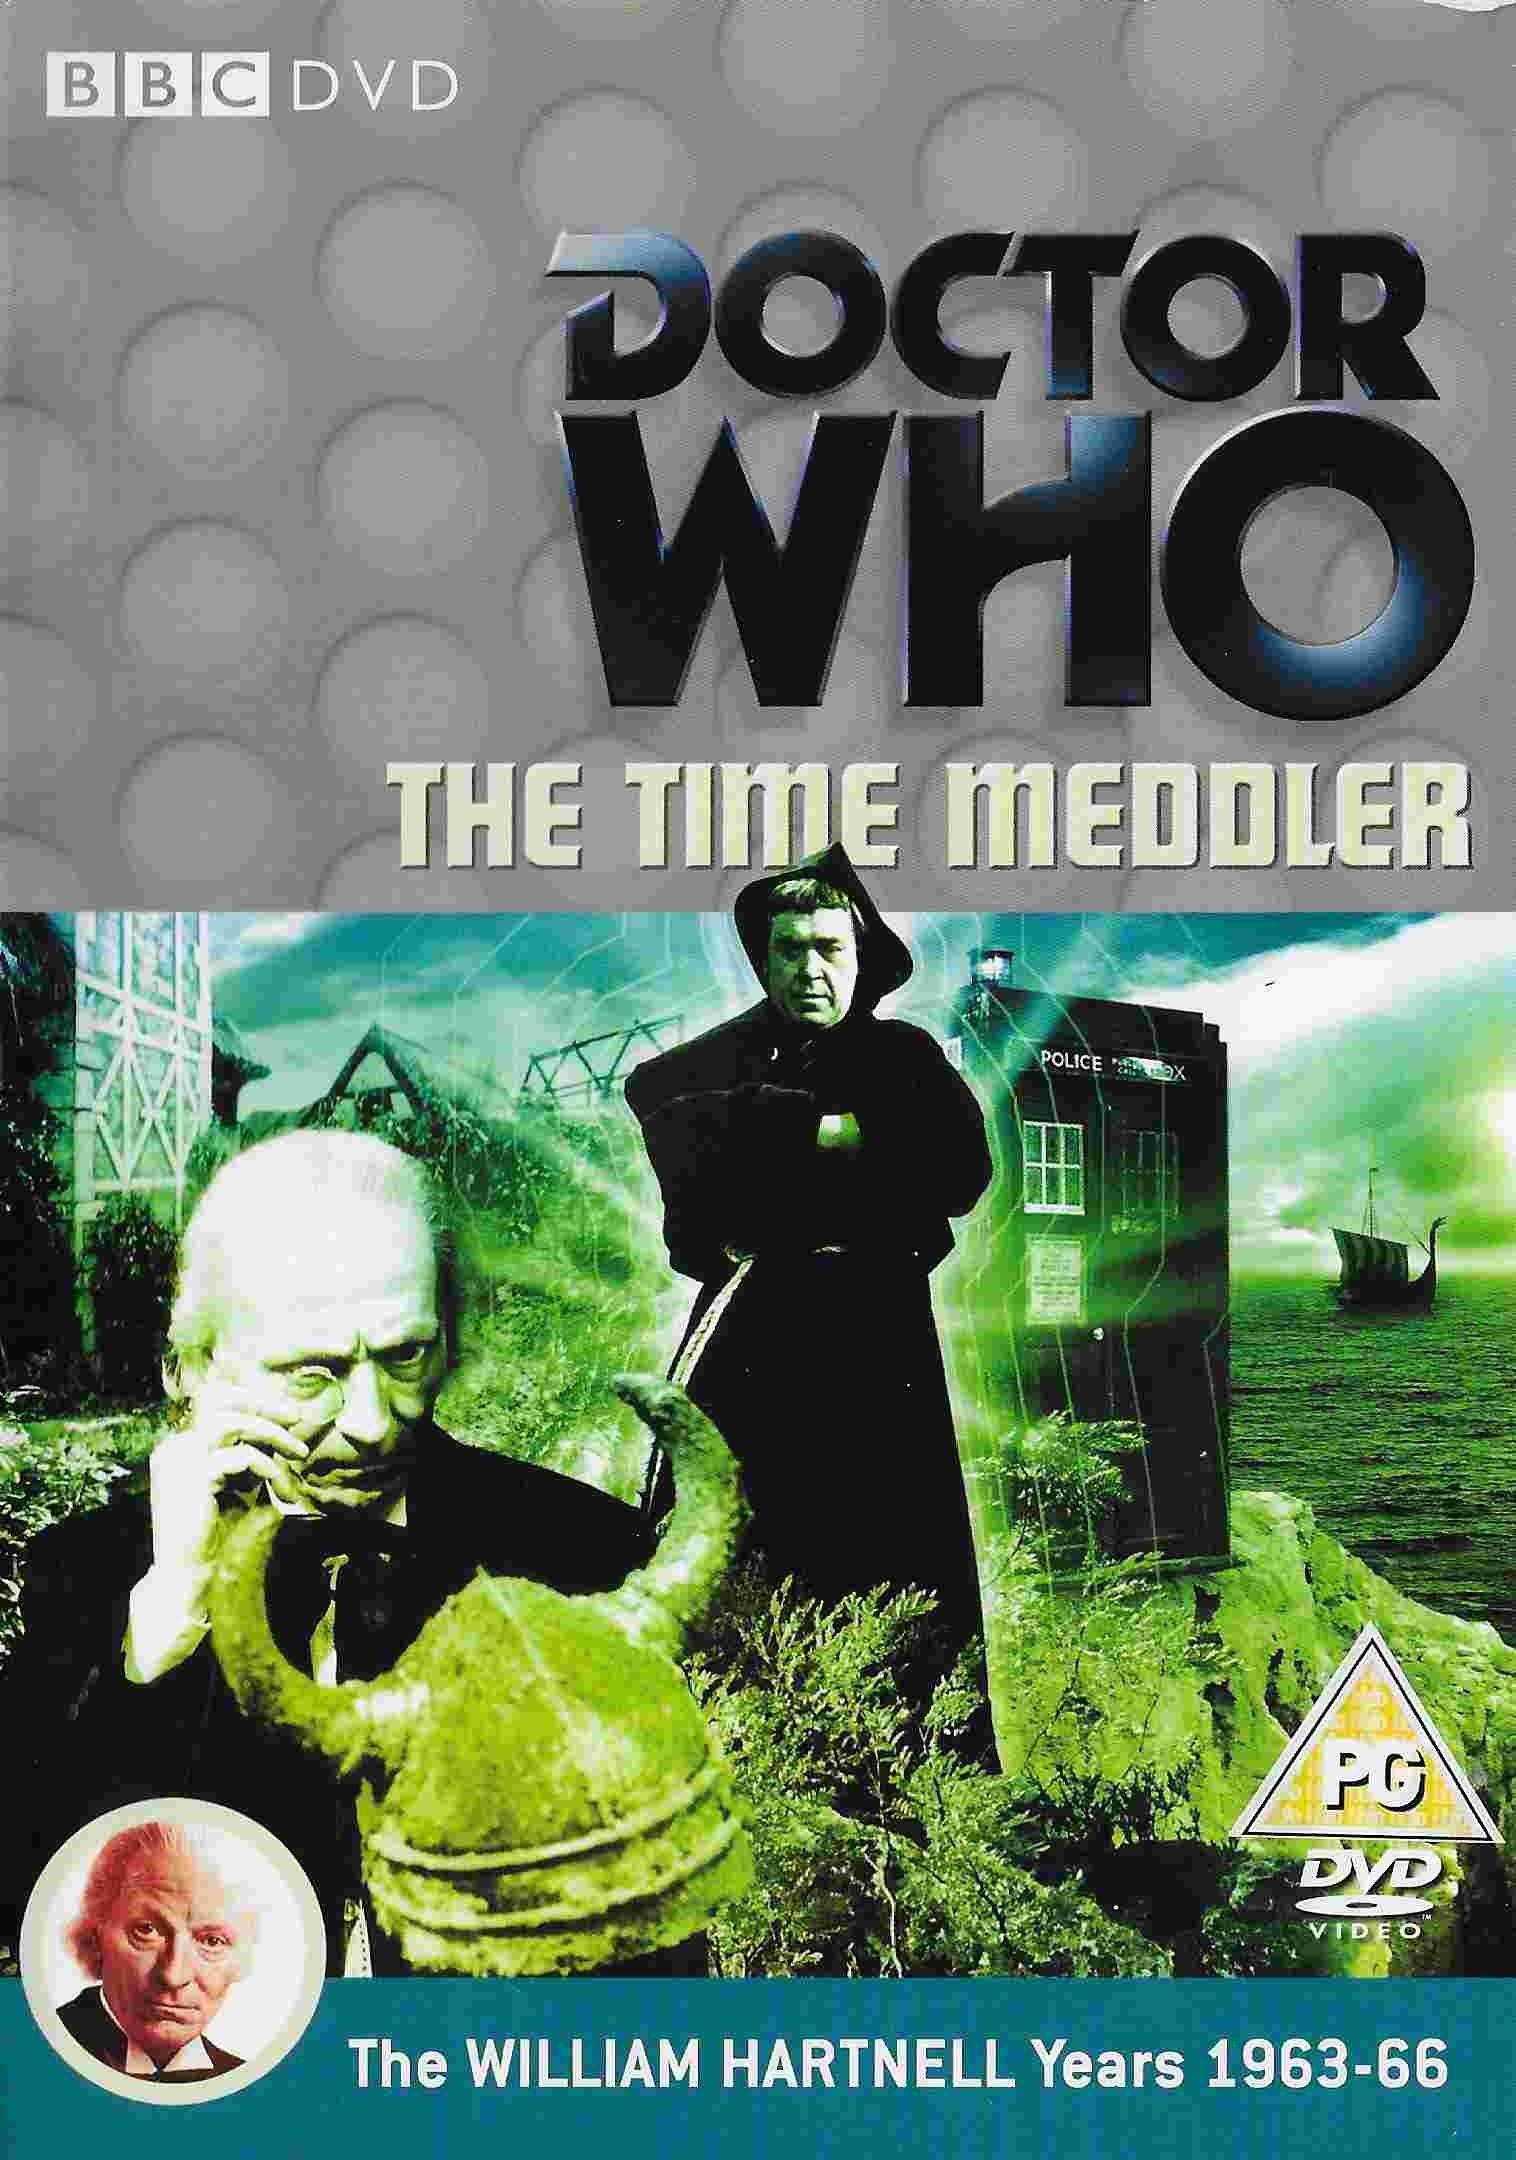 Picture of BBCDVD 2331 Doctor Who - The time medler by artist Dennis Spooner from the BBC dvds - Records and Tapes library